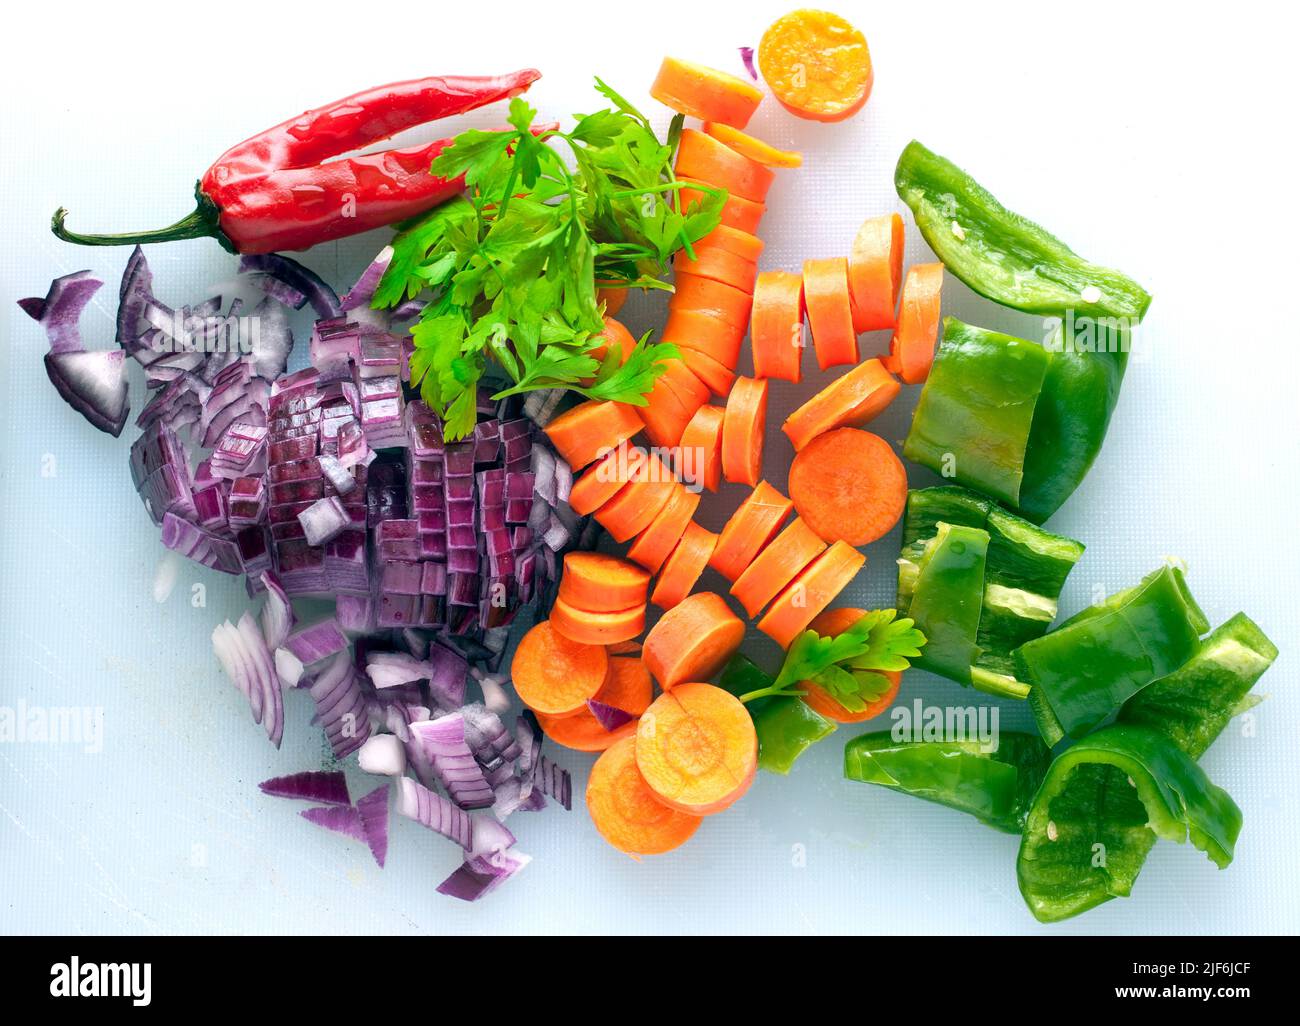 chopped vegetables cooking ingredients Stock Photo